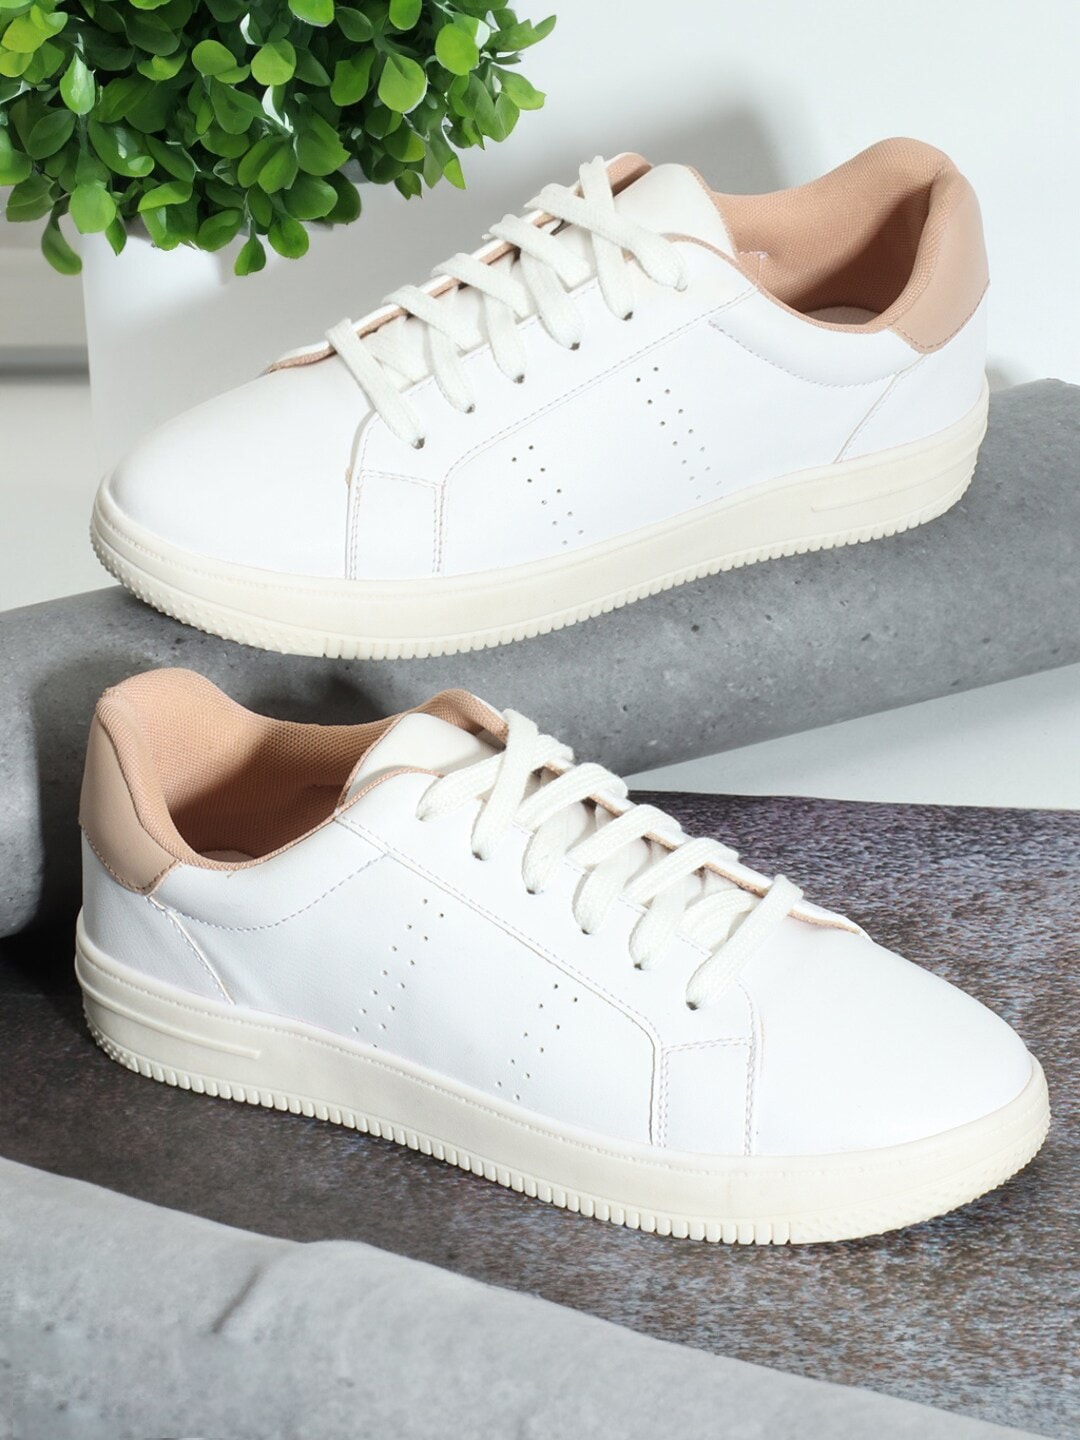 The Roadster Lifestyle Co. Women White Perforations Comfort Insole Lace-Ups Sneakers